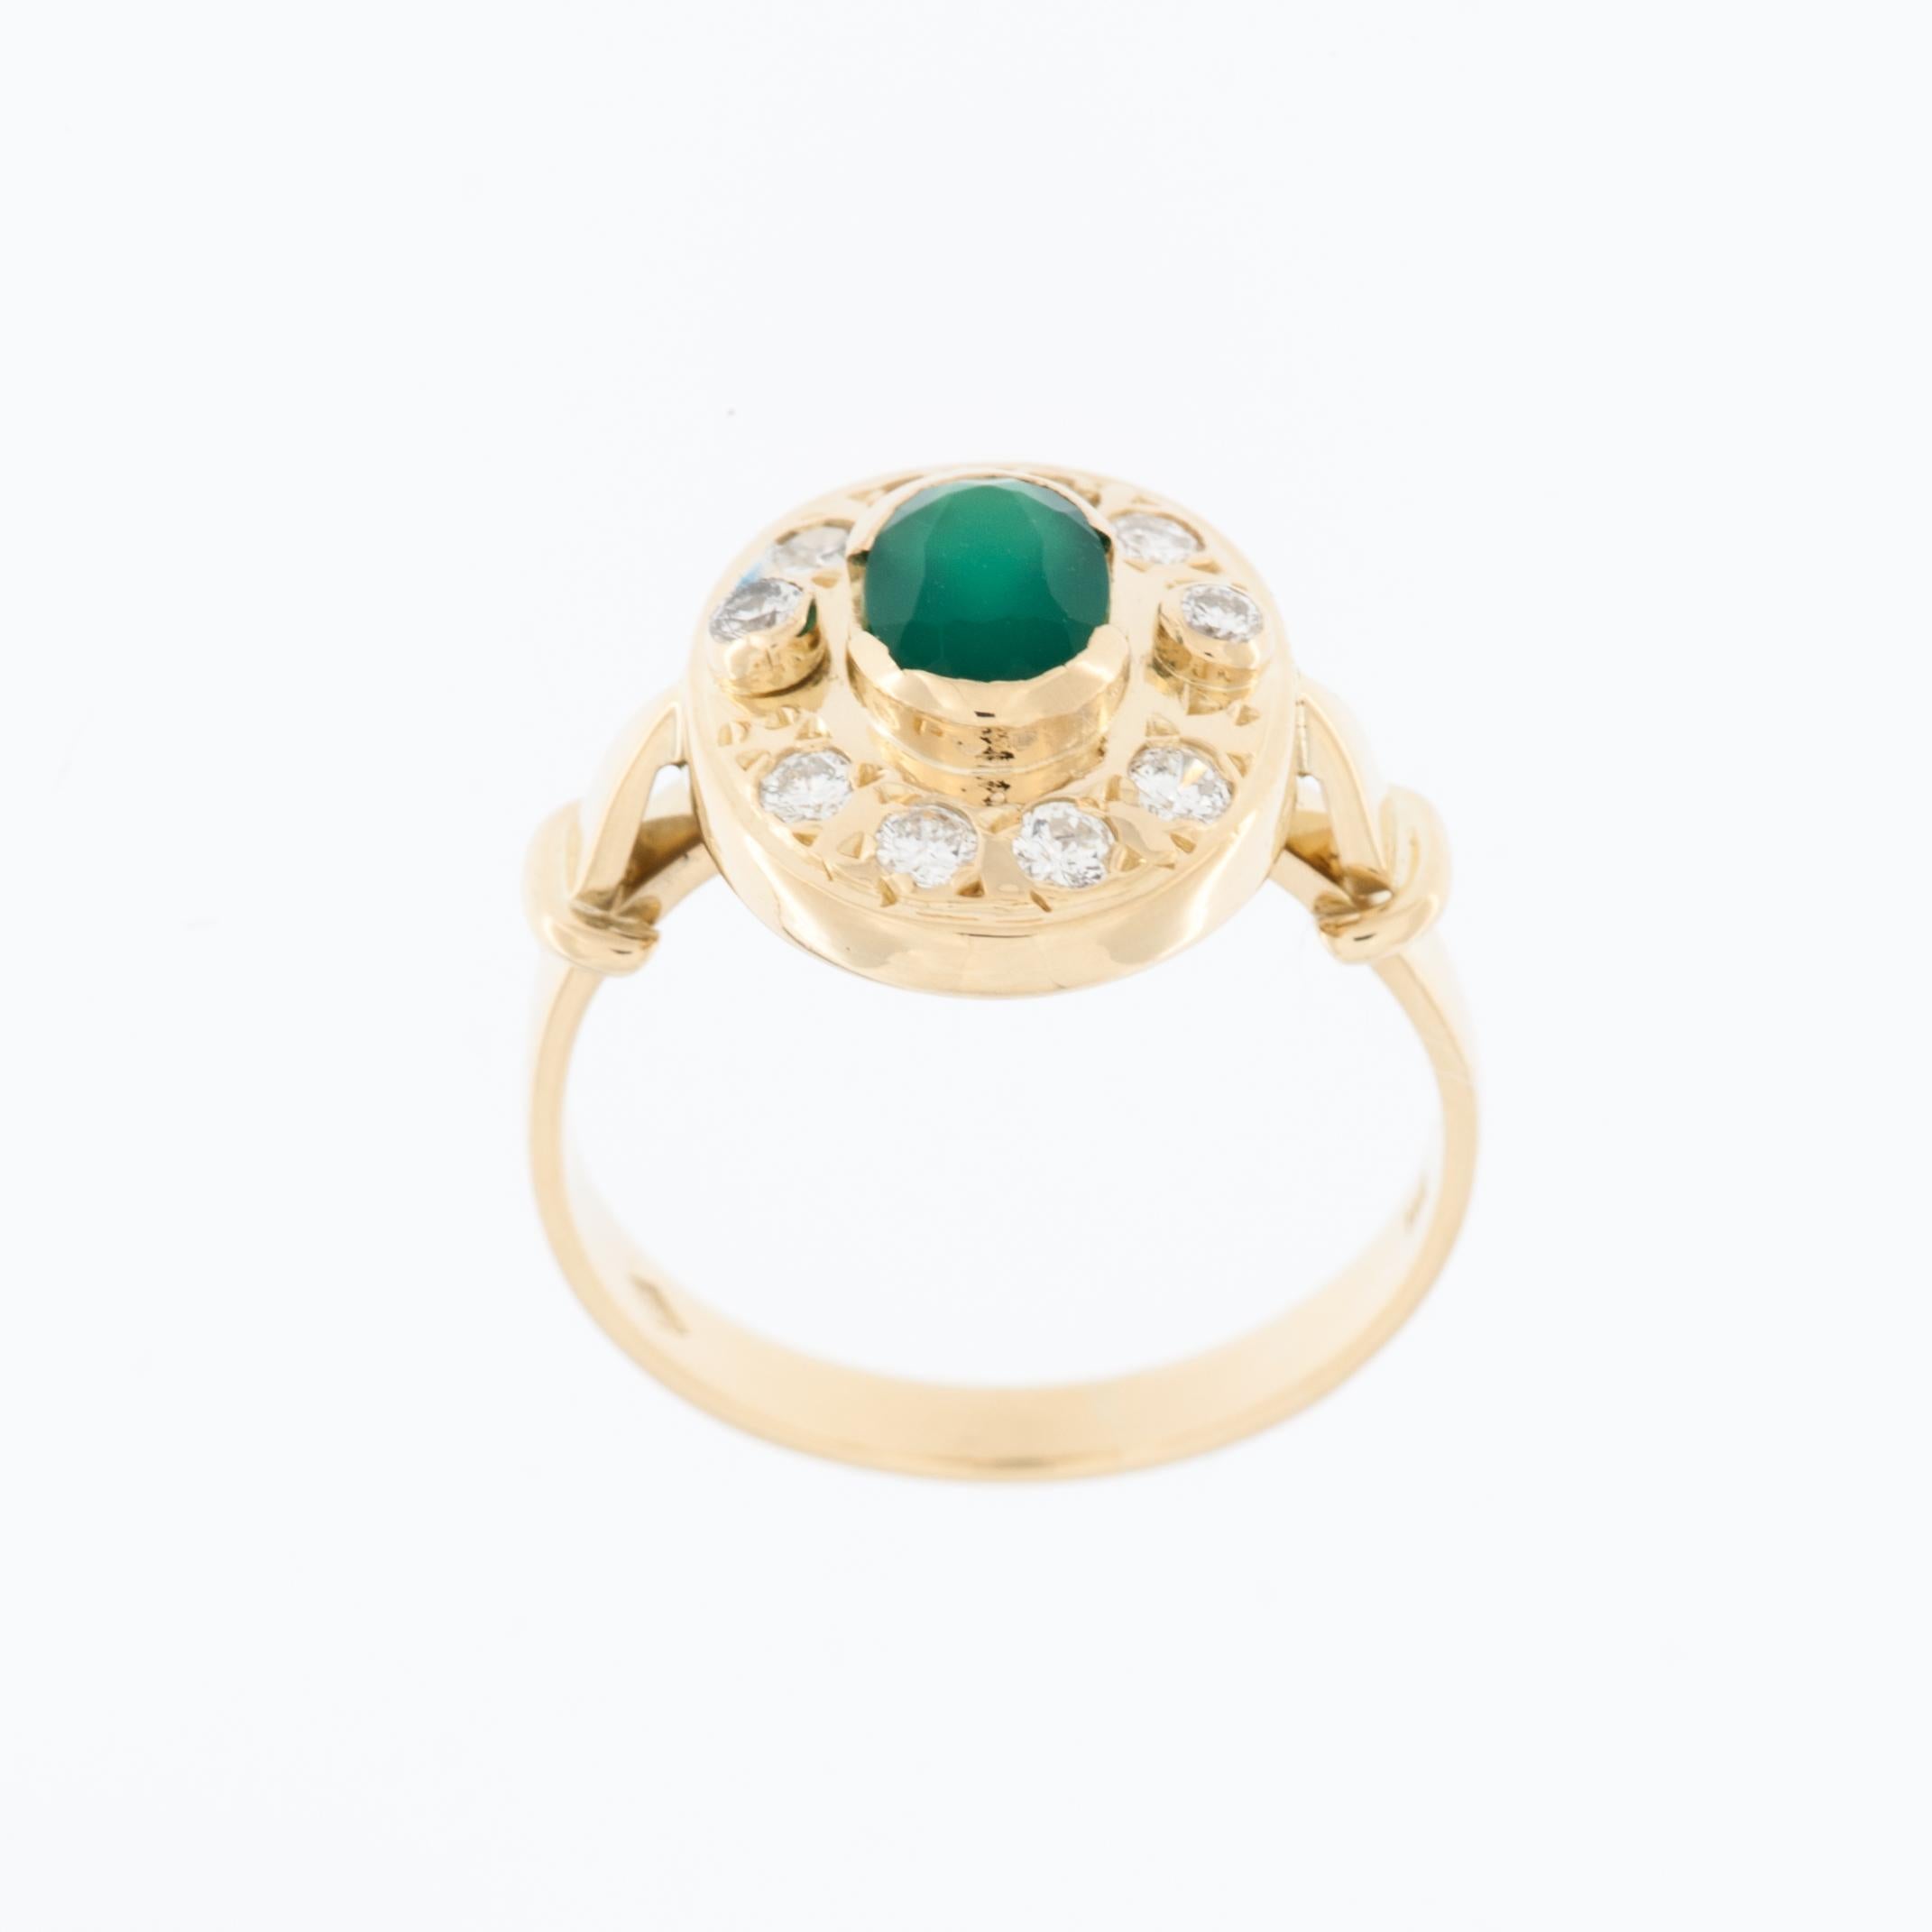 The emerald has meaning as a precious gem that expresses the magical, thaumaturgical and sapiential essence that is hidden in our heart and in that of all creation. Its esoteric value is among the greatest since the freest spirits of nature, the